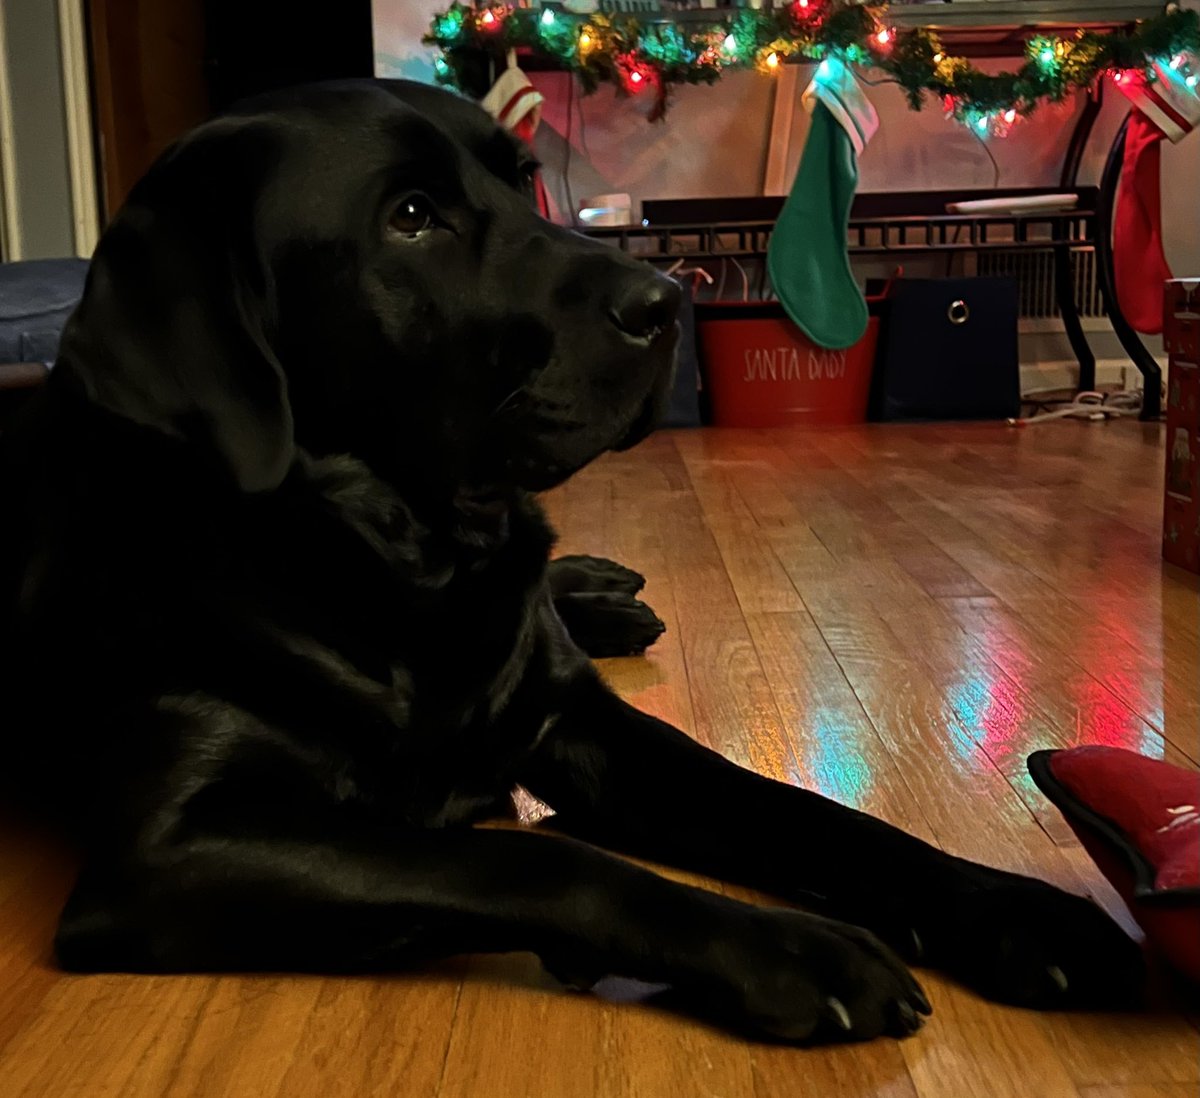 ‘Twas the night before Christmas, when all through the house not a creature was stirring, not even a mouse. #silentnight #christmaseve #santaiscoming #merrychristmas #happypawlidays #diggledog